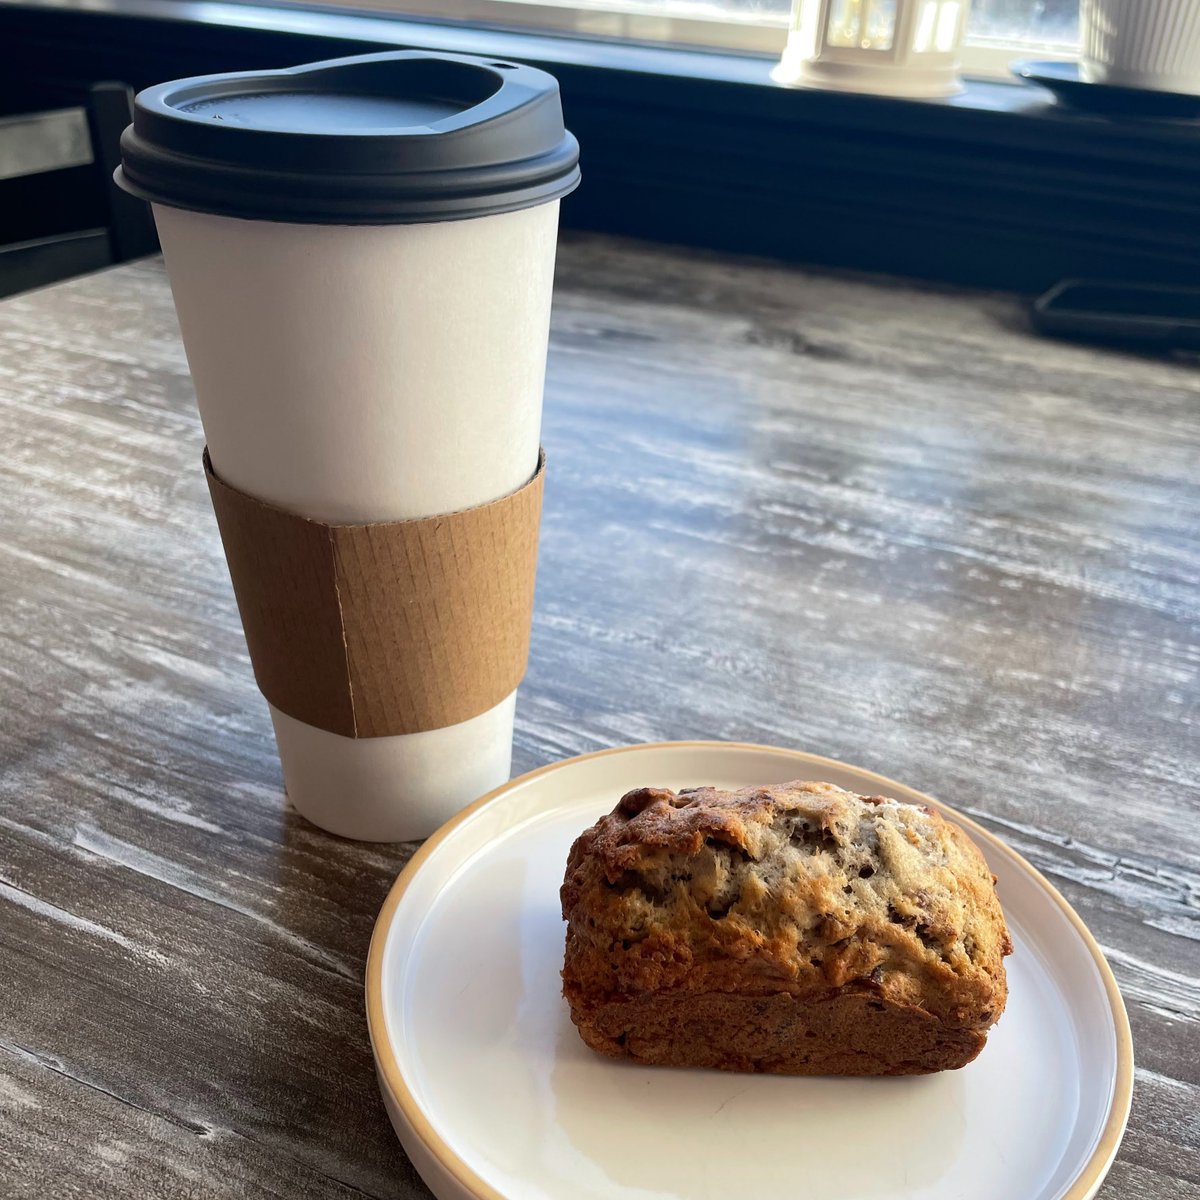 Indulge in heavenly baked goods paired with aromatic coffee – a match made in taste bud heaven. 🍰☕️

We're open until 3pm. See you soon!

#PerfectPairing #SocialGoodCafe #LdnOnt #YouthTraining